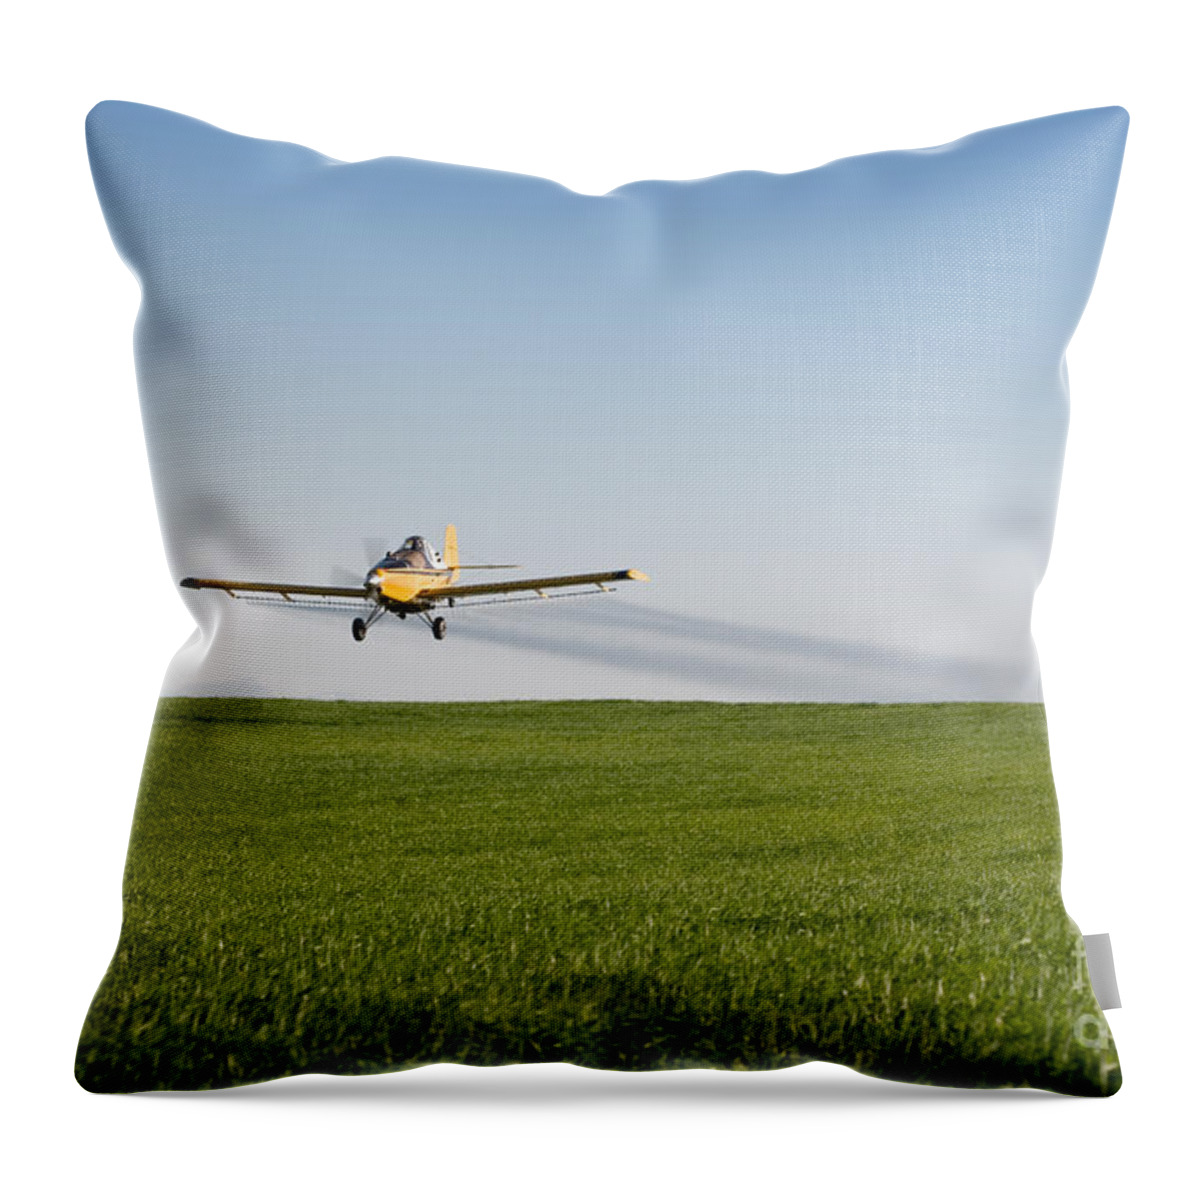 Plane Throw Pillow featuring the photograph Crop Duster Airplane Flying Over Farmland by Cindy Singleton